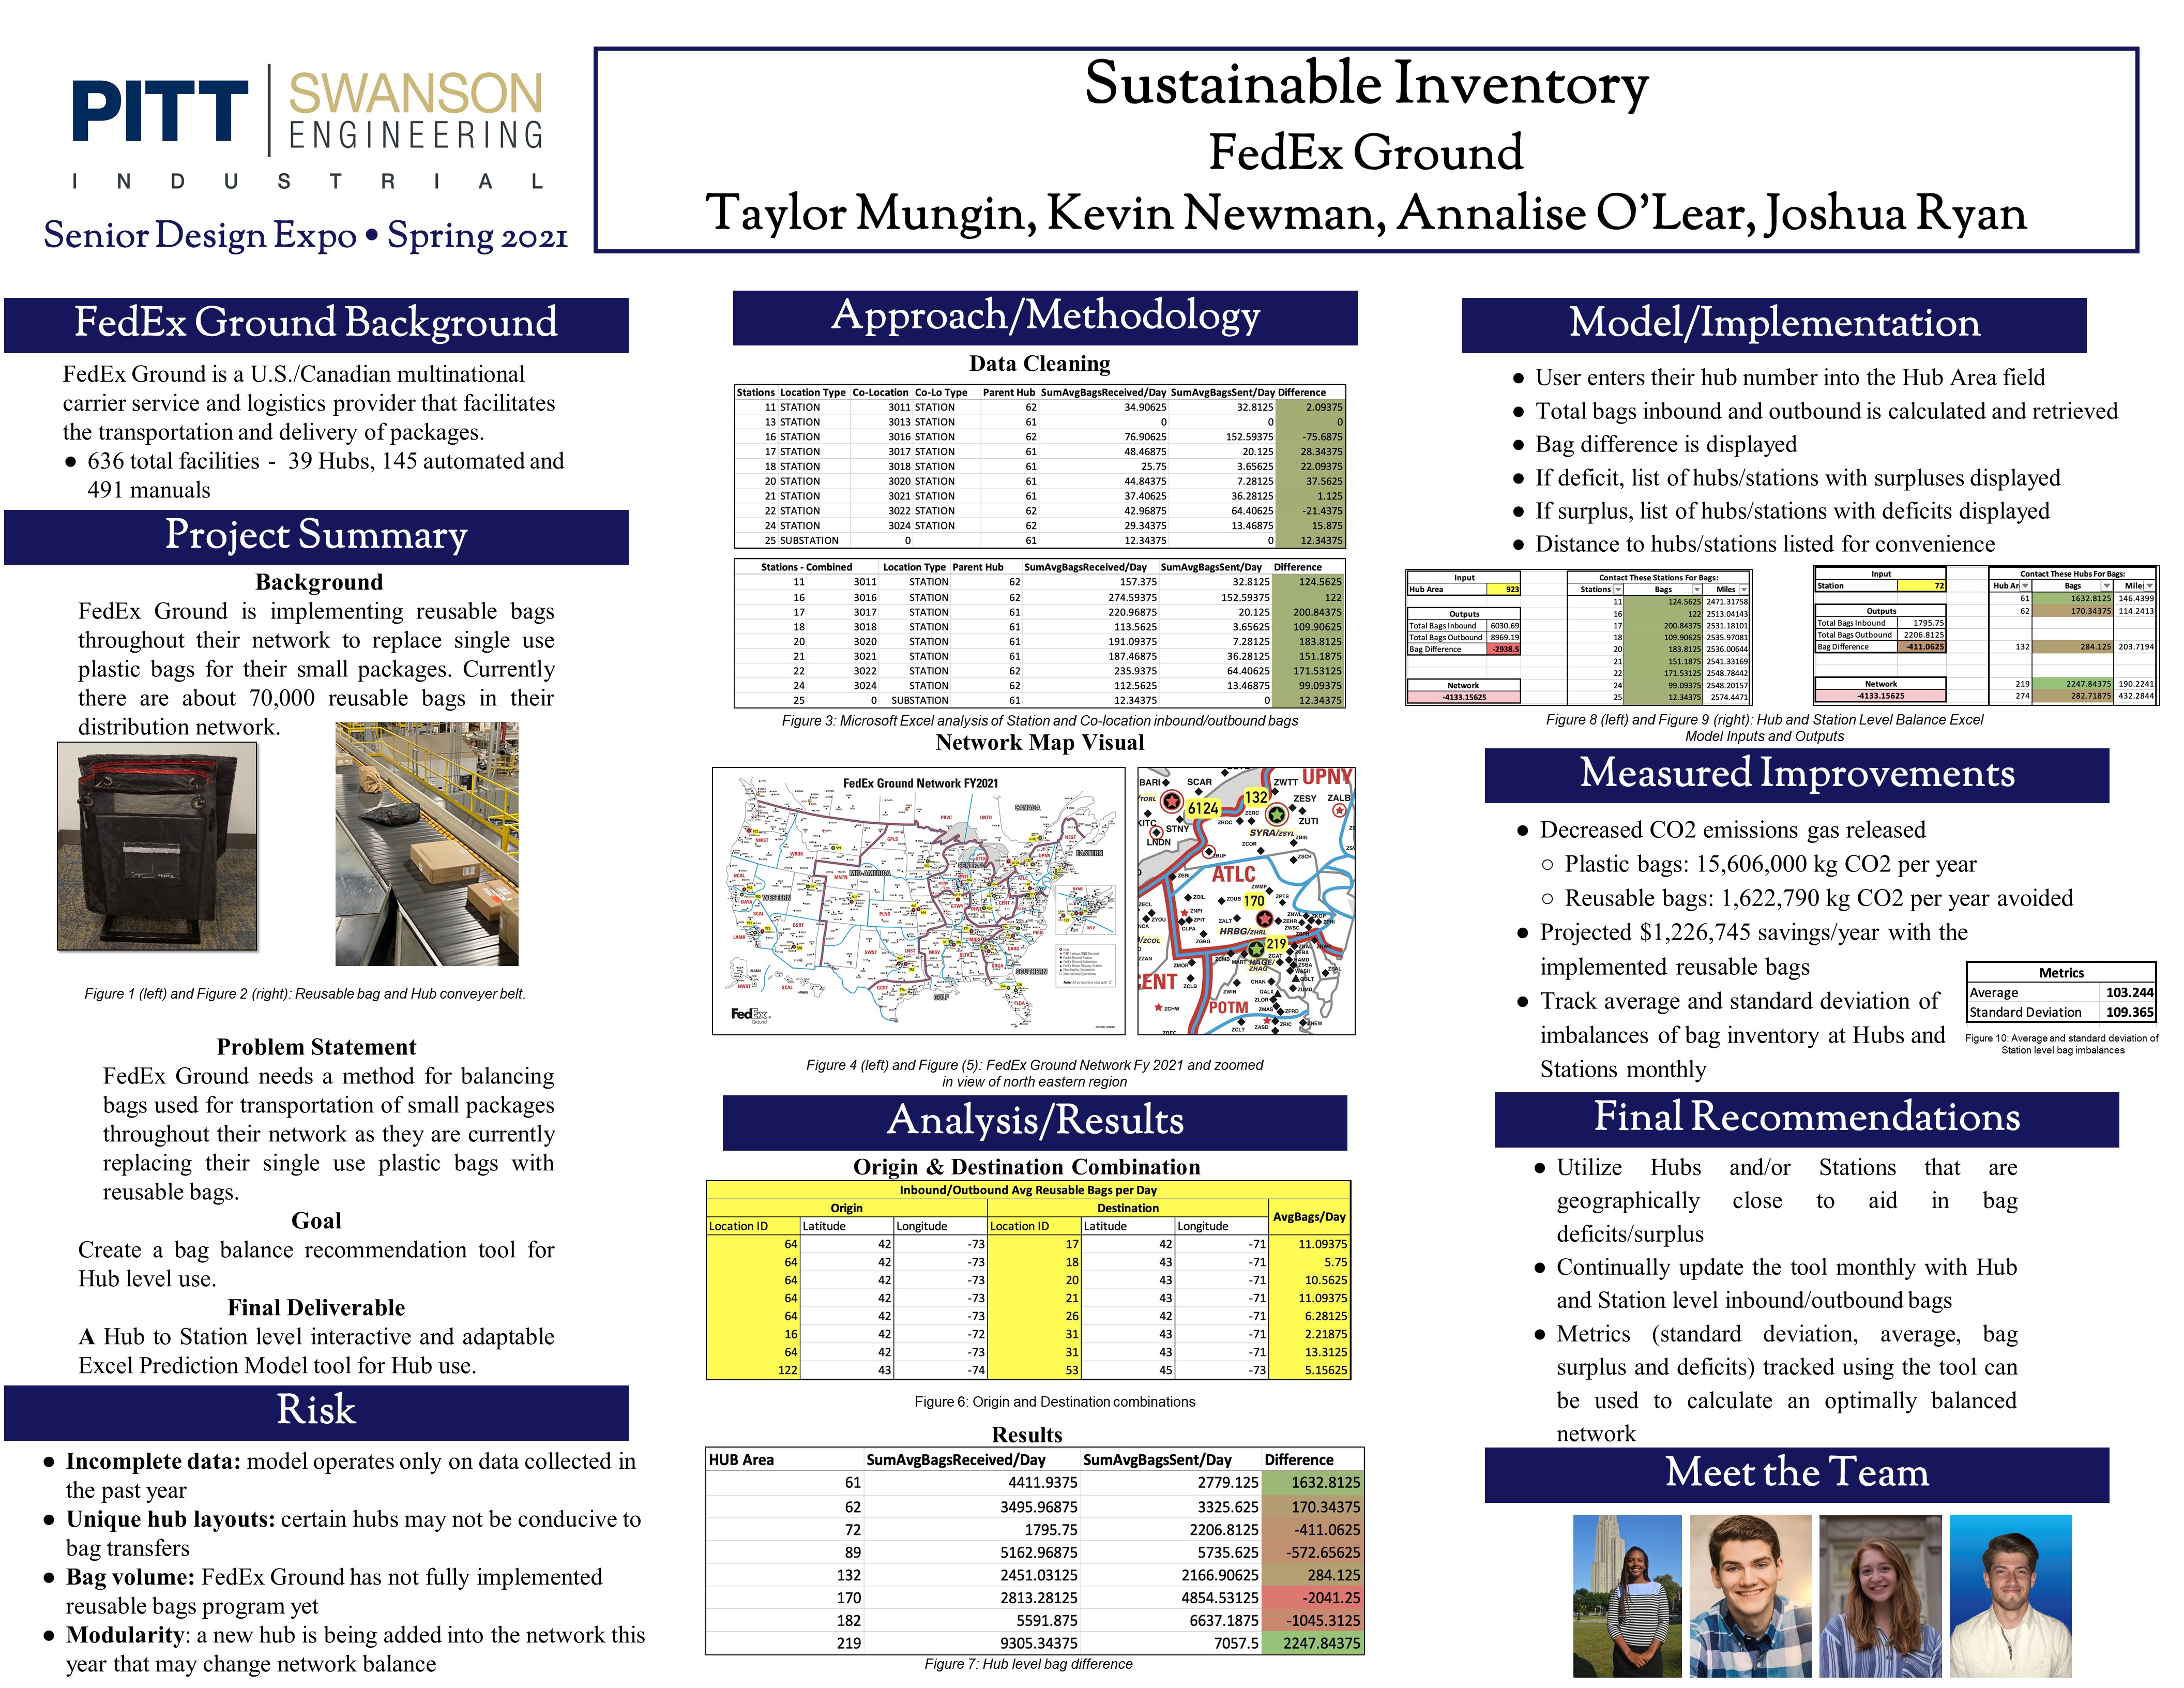 Senior Design Project - Sustainable Inventory